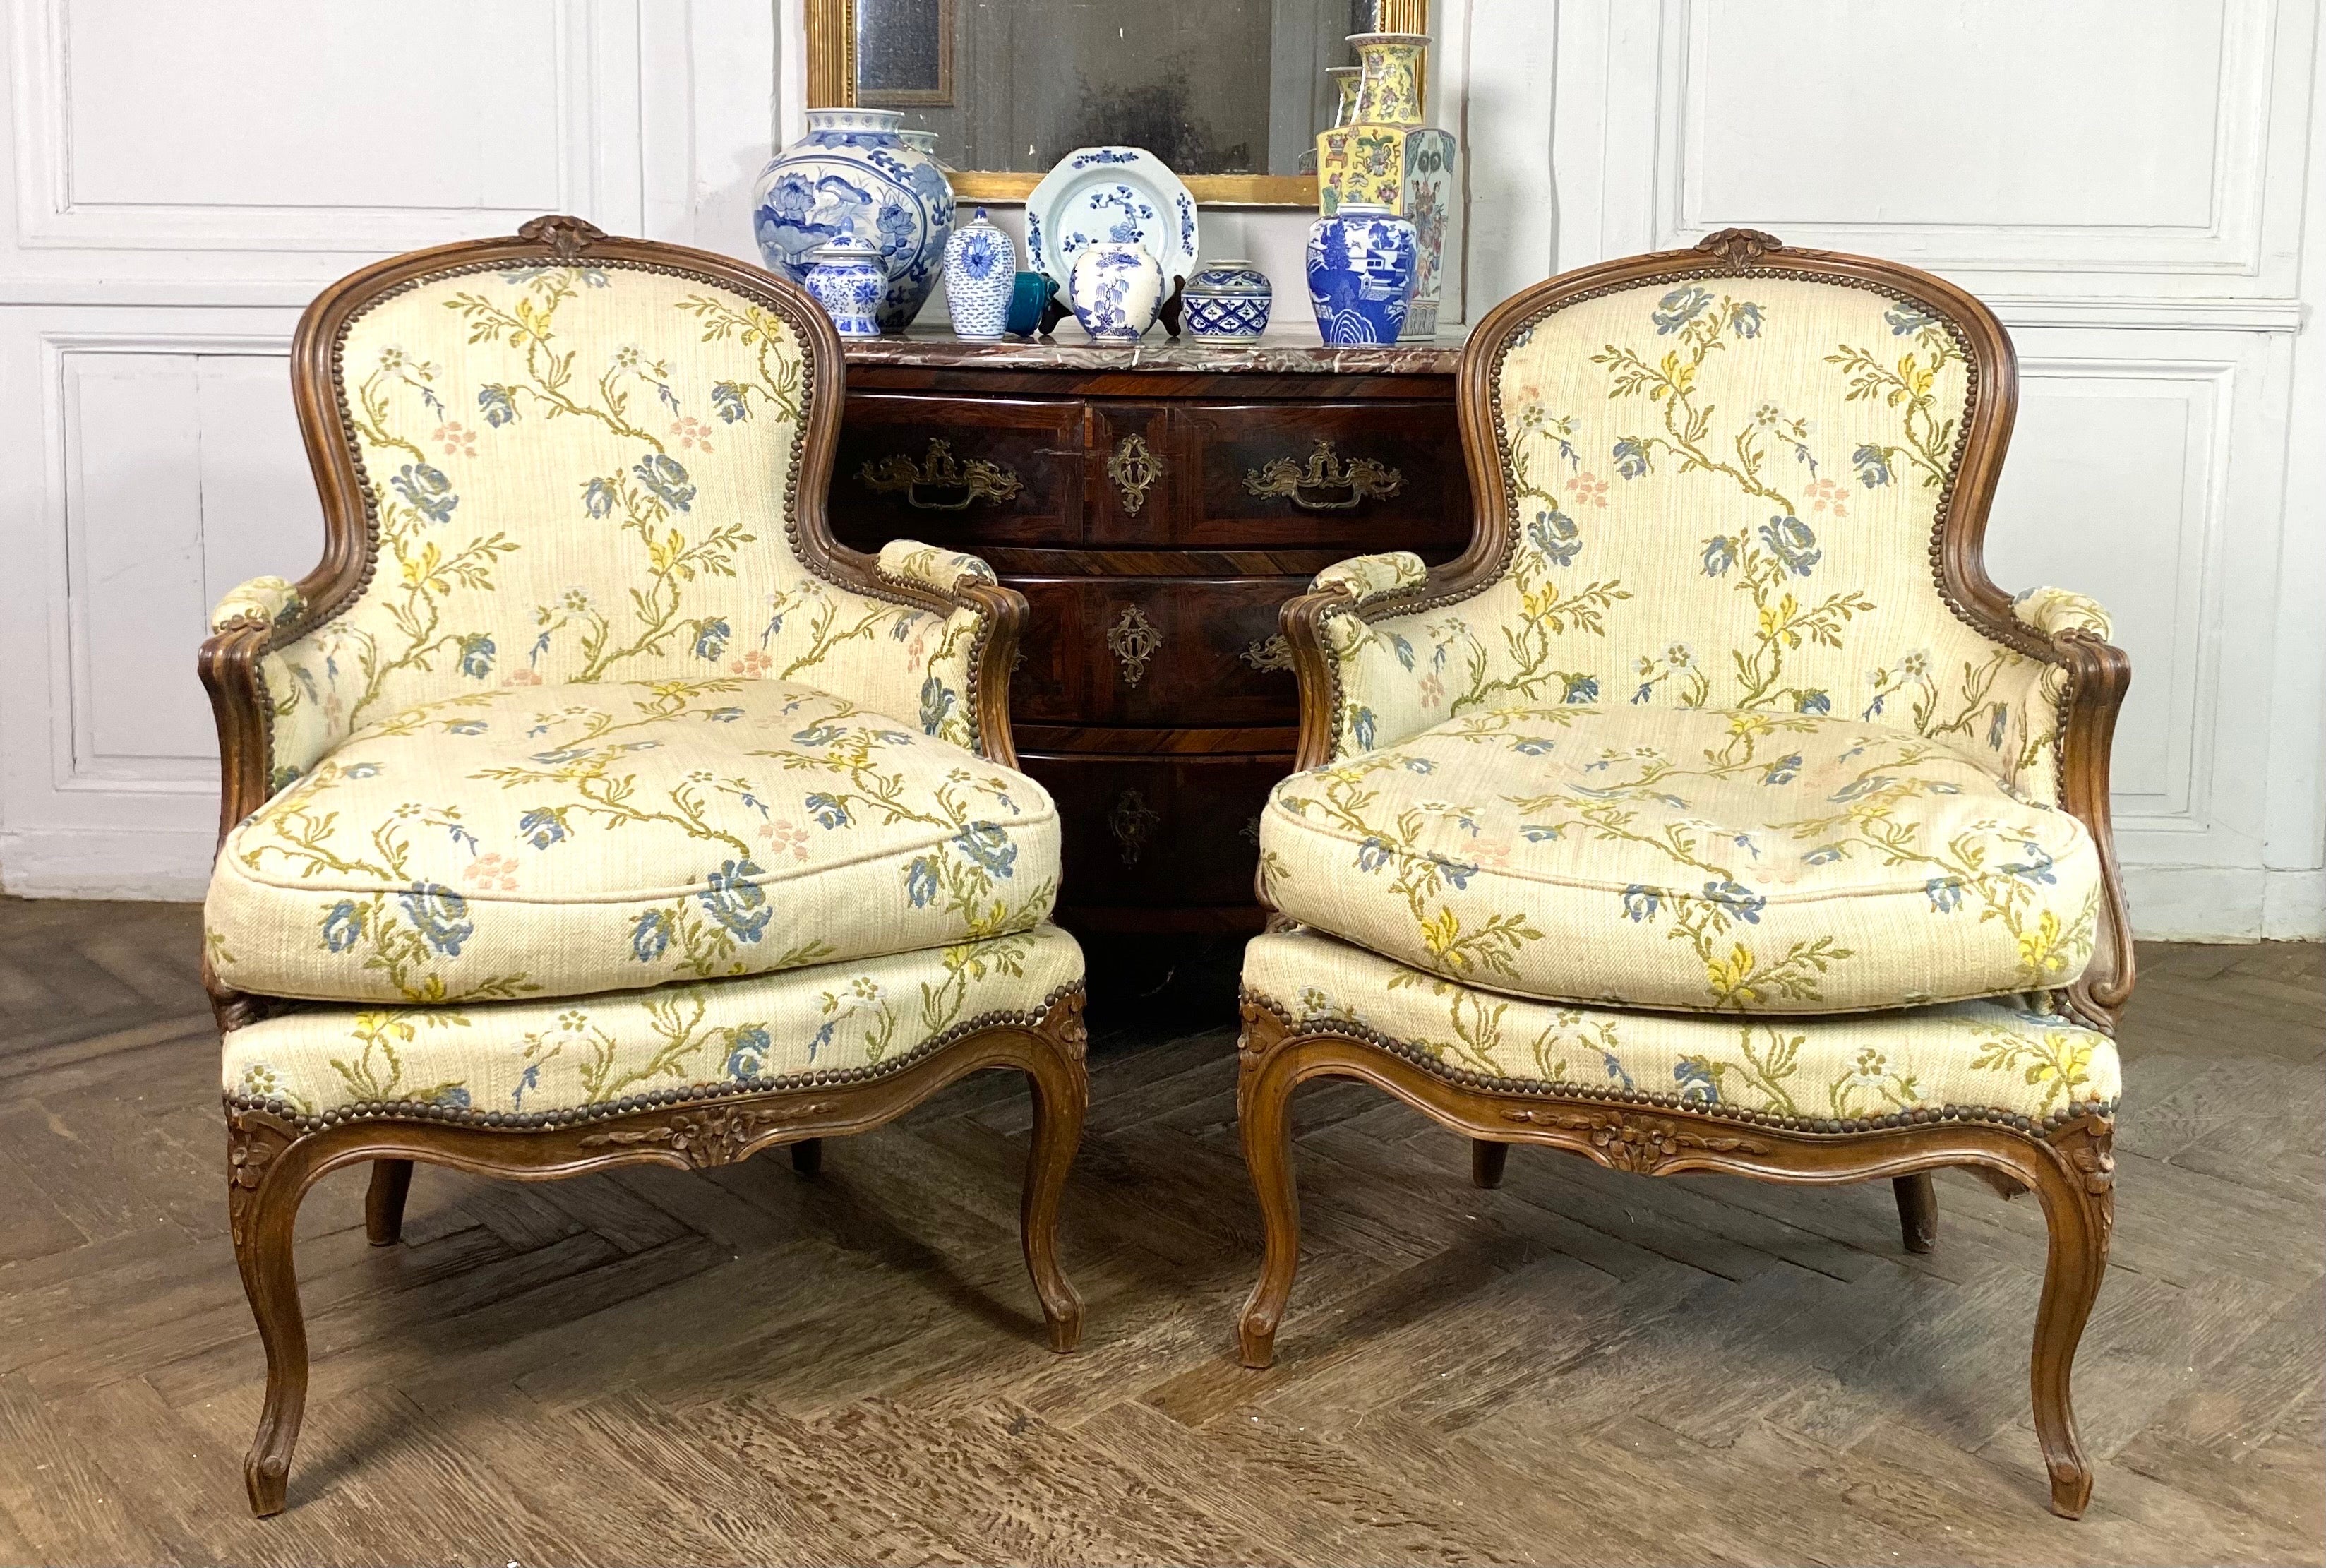 Wonderful pair of Louis XV style shepherd armchairs from the XIXth Century in carved wood. With vegetable decoration of flowers carved on the convertible backrest and on the deeply molded moving belt.
The whiplash armrests have cuffs.
The armchairs